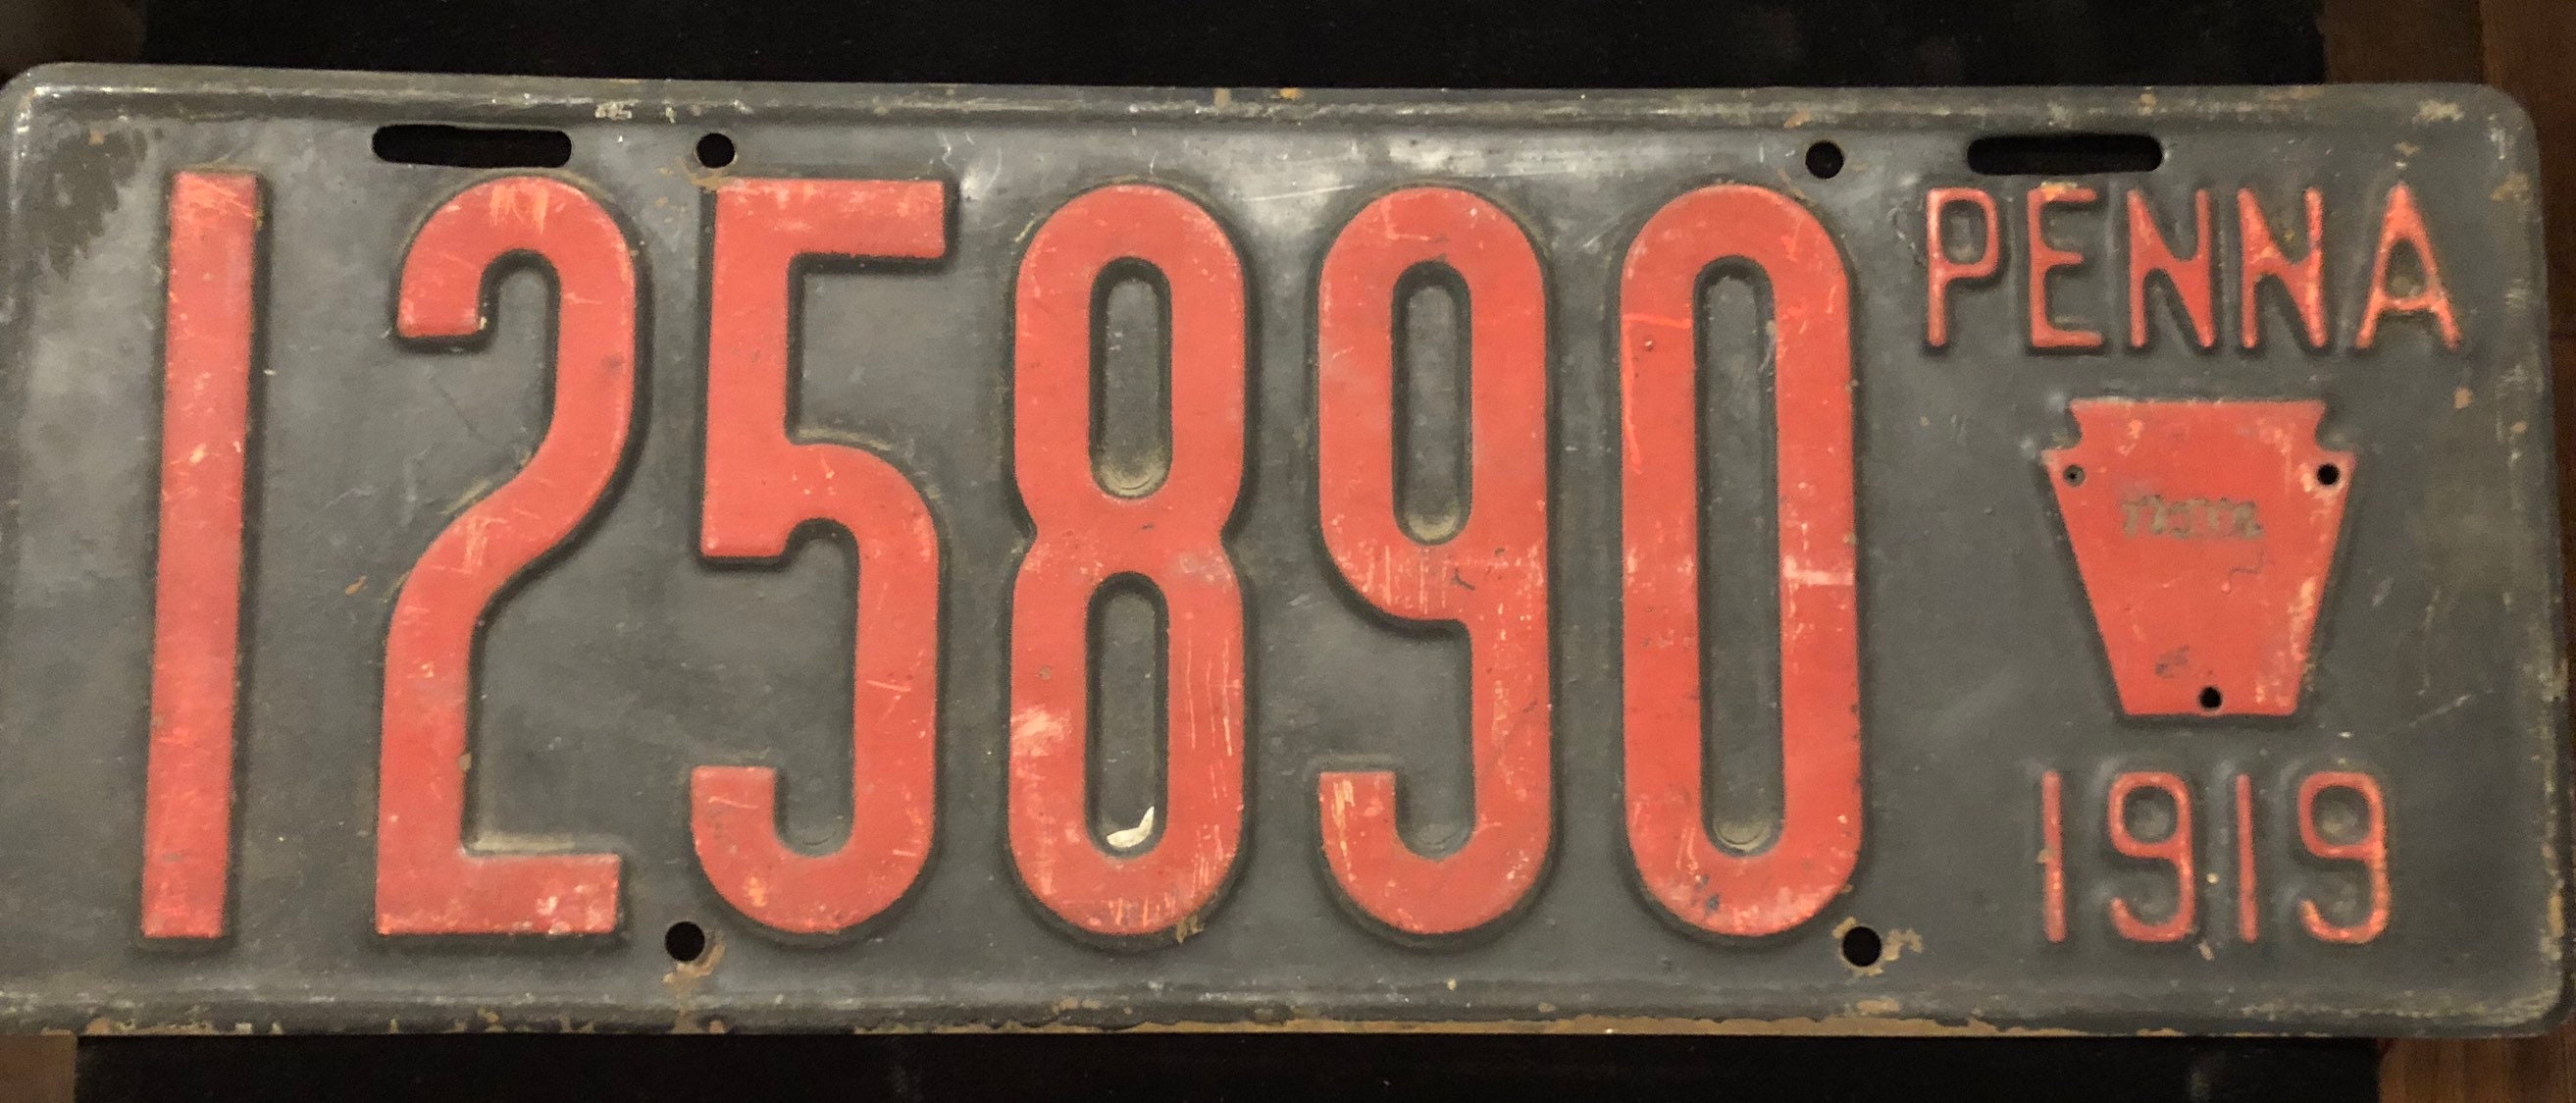 1919 Vintage PA Original License Plate in Excellent Condition | Etsy